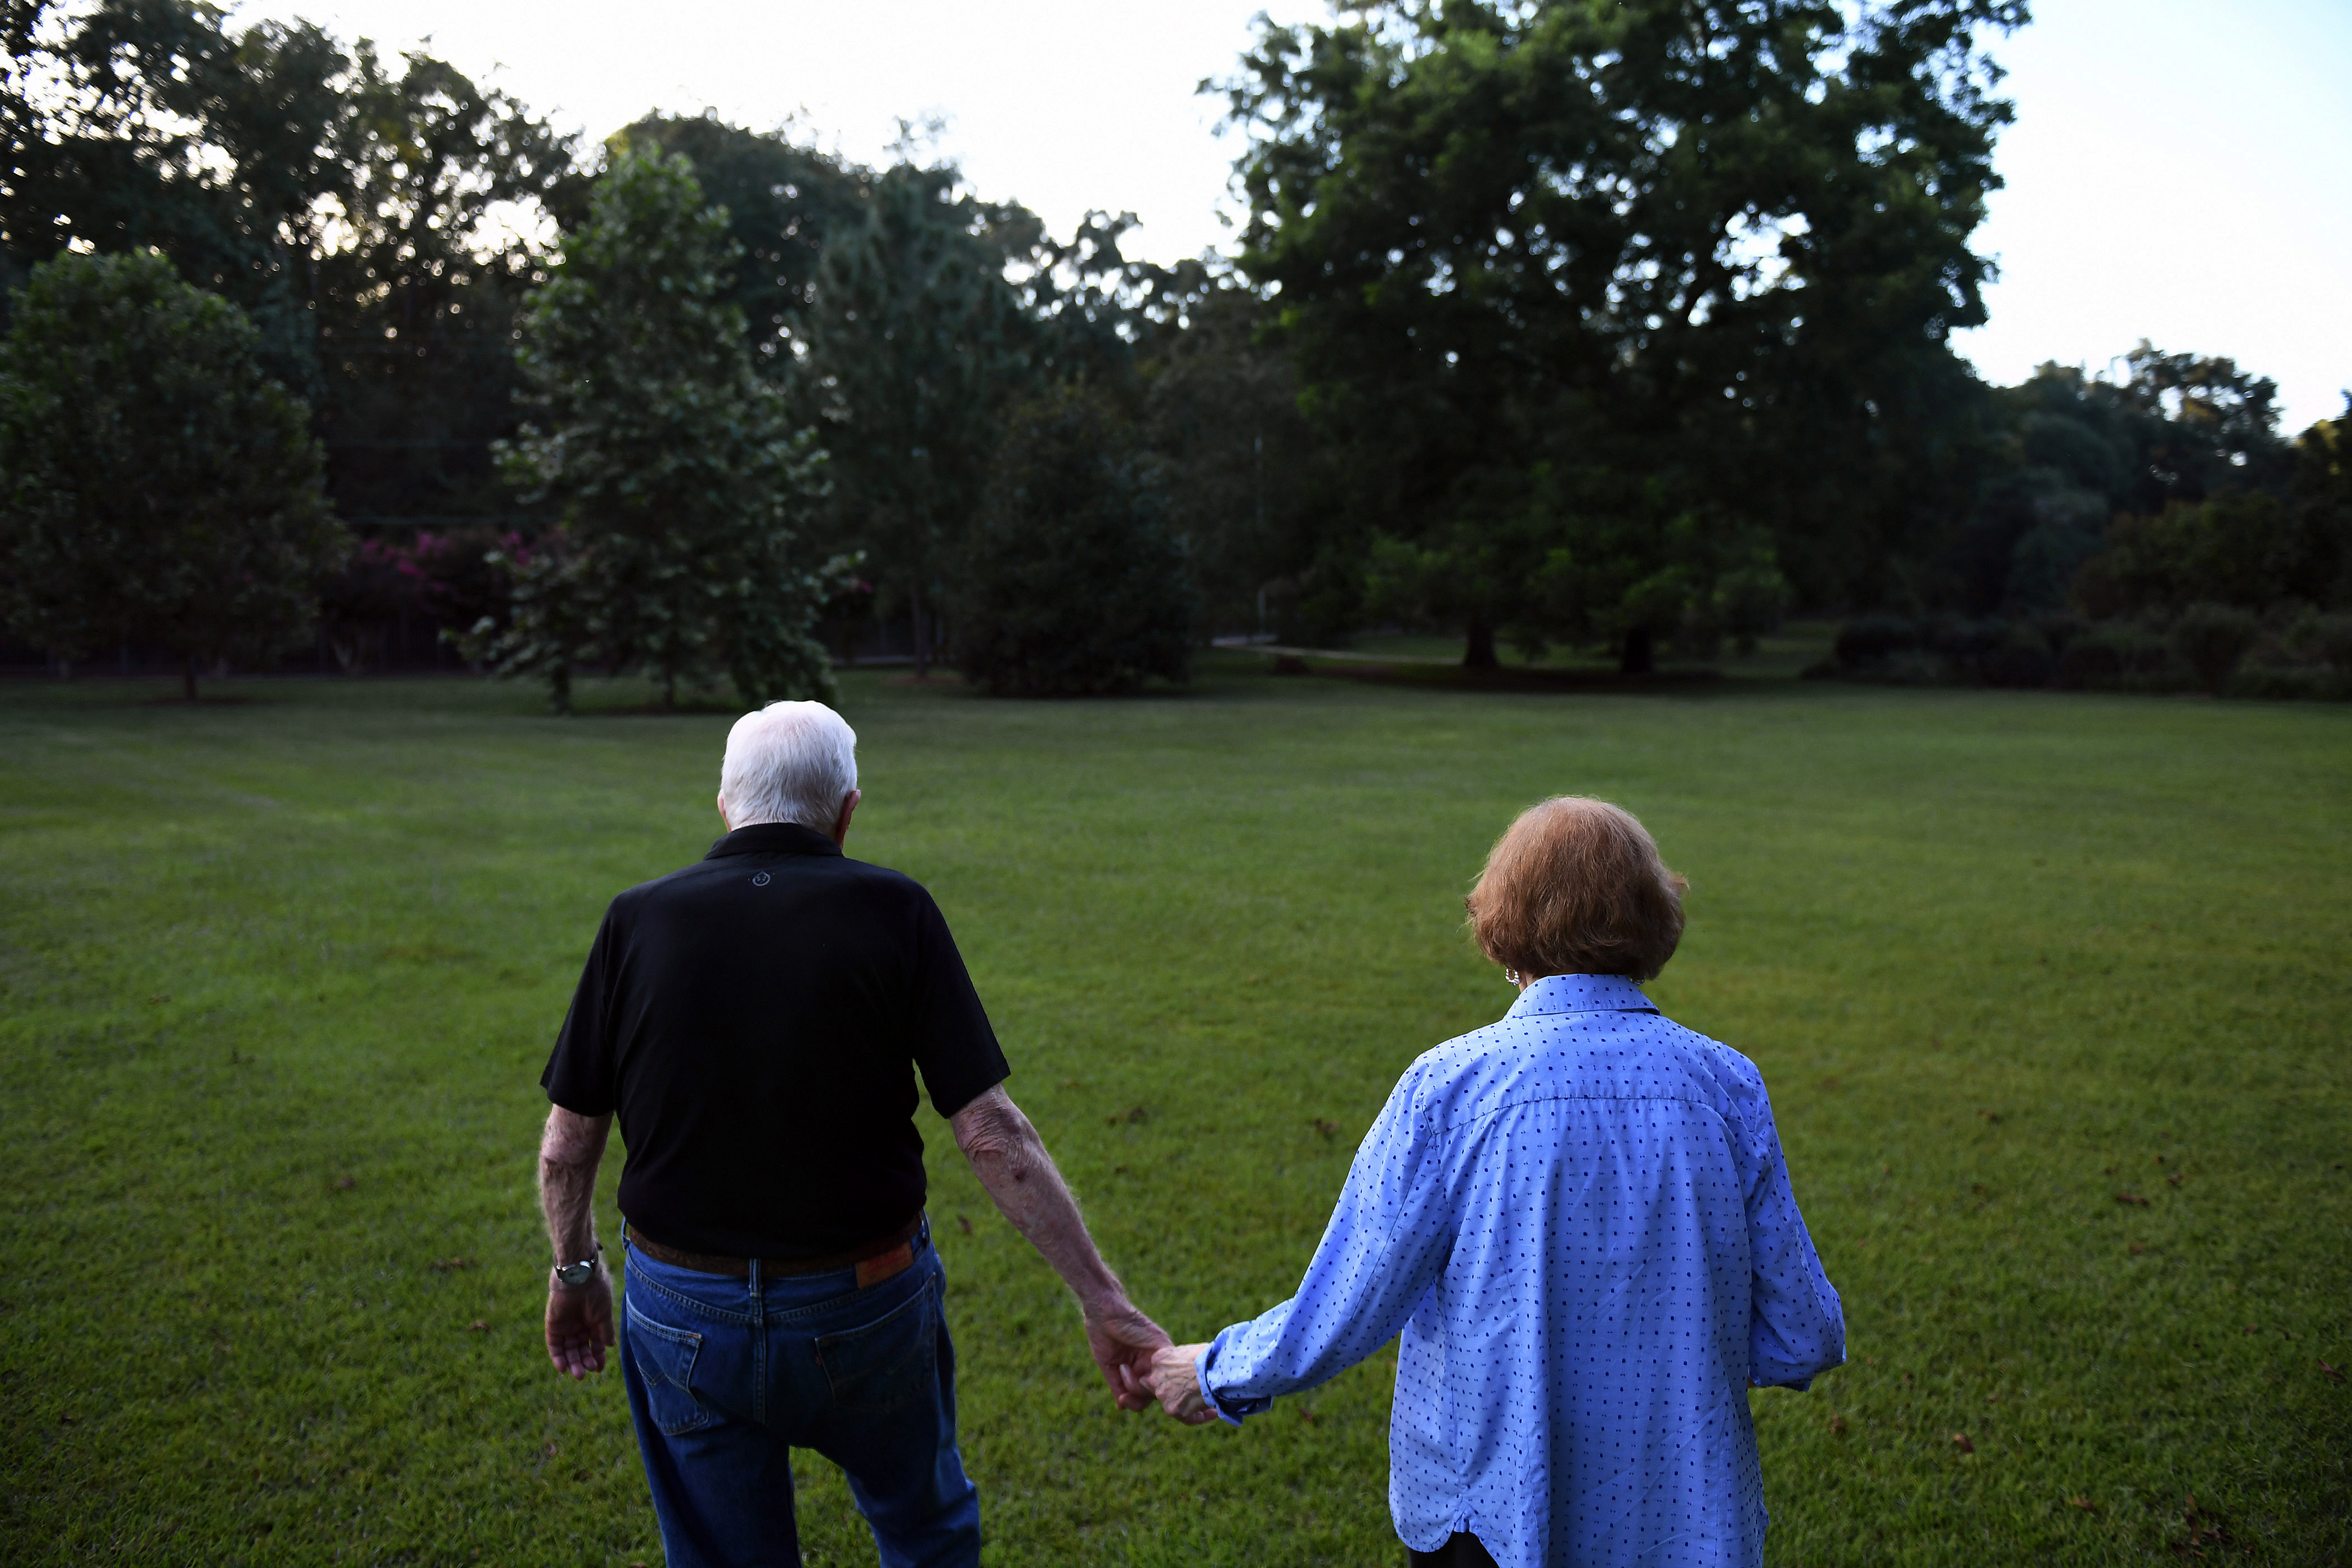 Jimmy and Rosalynn Carter taking a walk after having dinner at the home of friend, Jill Stuckey in Plains, Georgia, on August 4, 2018. | Source: Getty Images